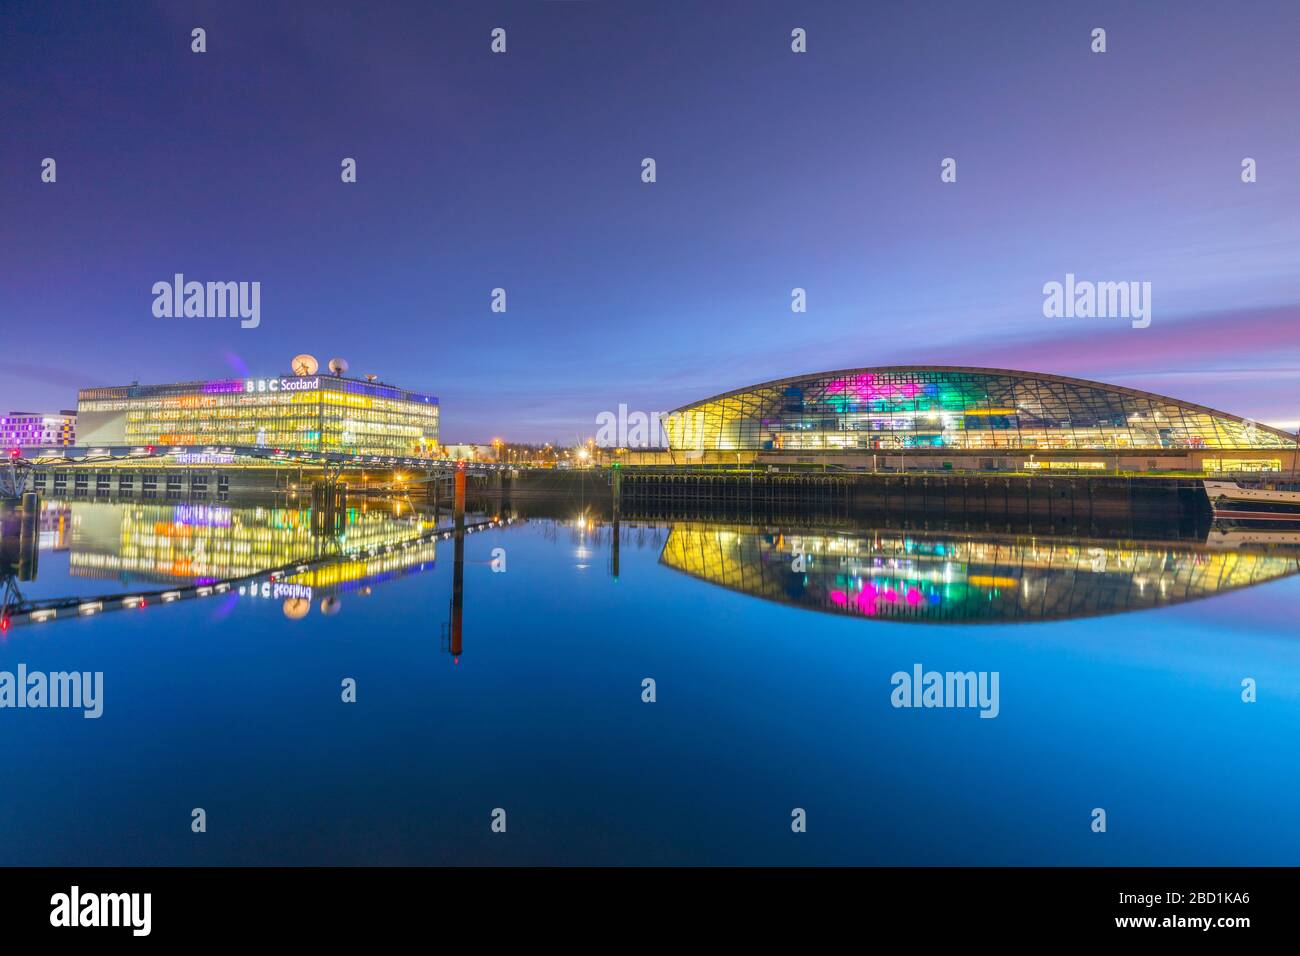 BBC Scotland Headquarters and The Science Museum at dusk, River Clyde, Glasgow, Scotland, United Kingdom, Europe Stock Photo